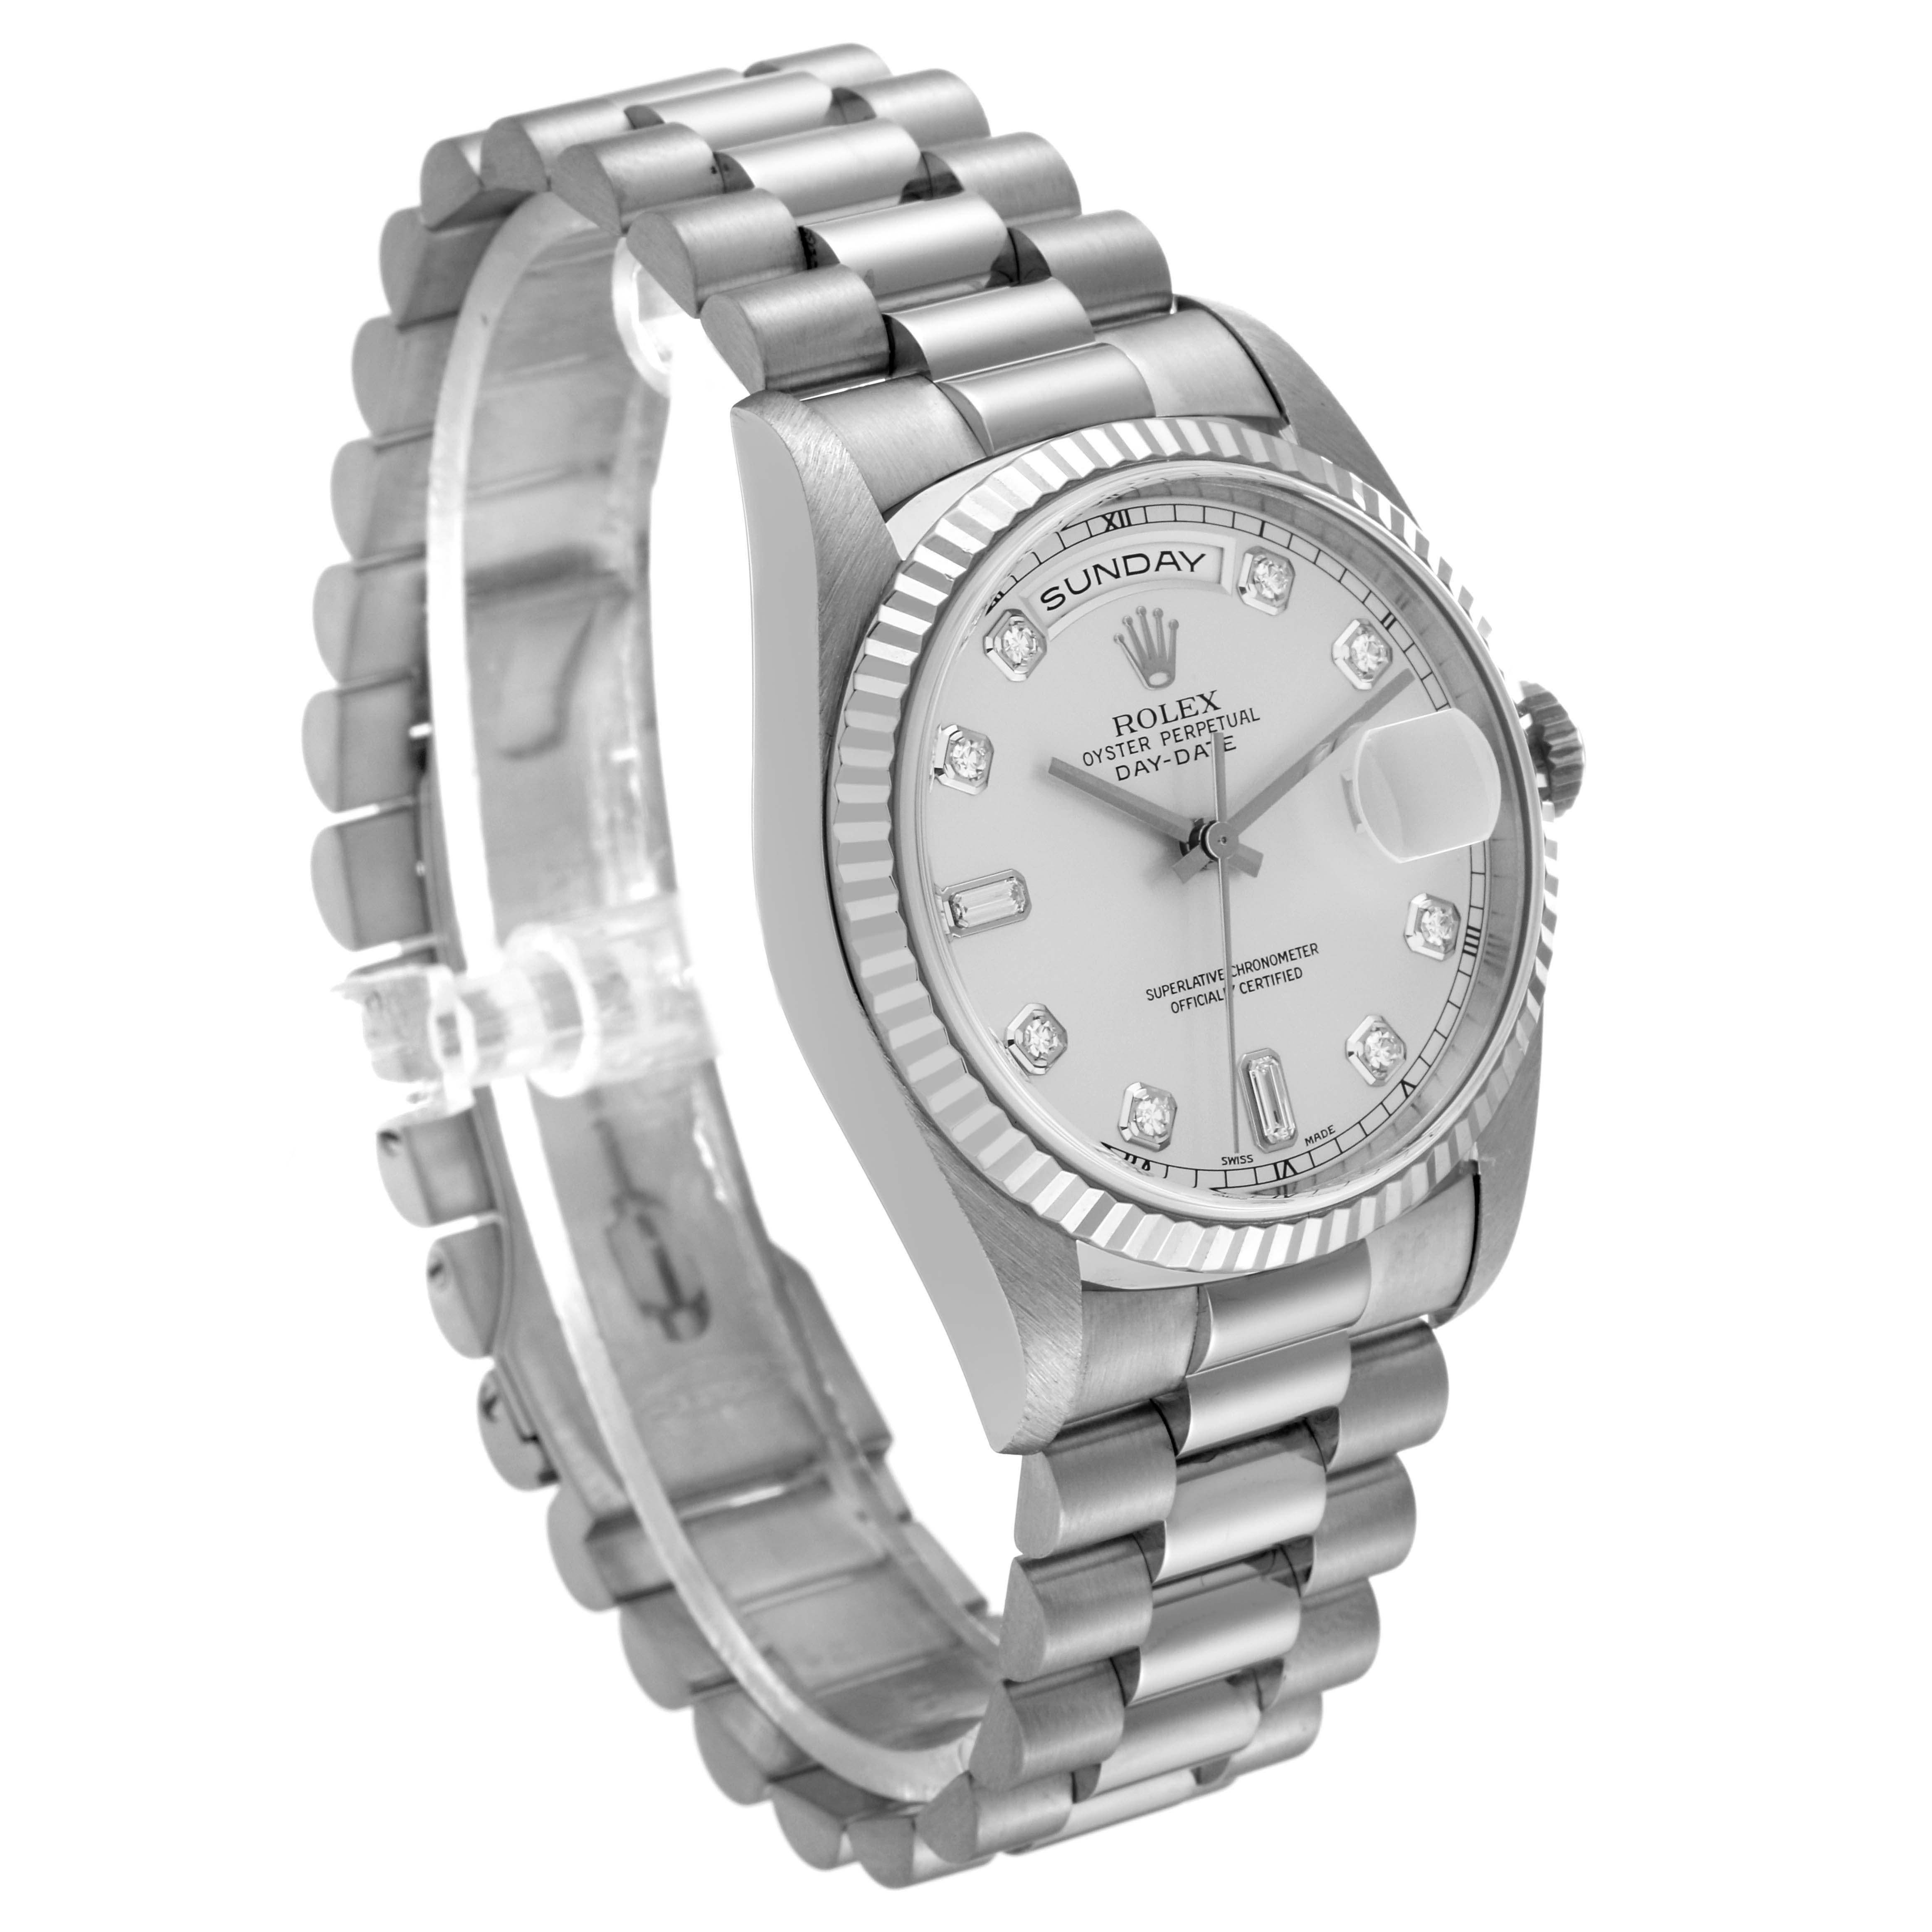 Rolex President Day-Date White Gold Diamond Dial Mens Watch 18239. Officially certified chronometer self-winding movement with quickset date function. 18k white gold oyster case 36.0 mm in diameter. Rolex logo on a crown. 18k white gold fluted